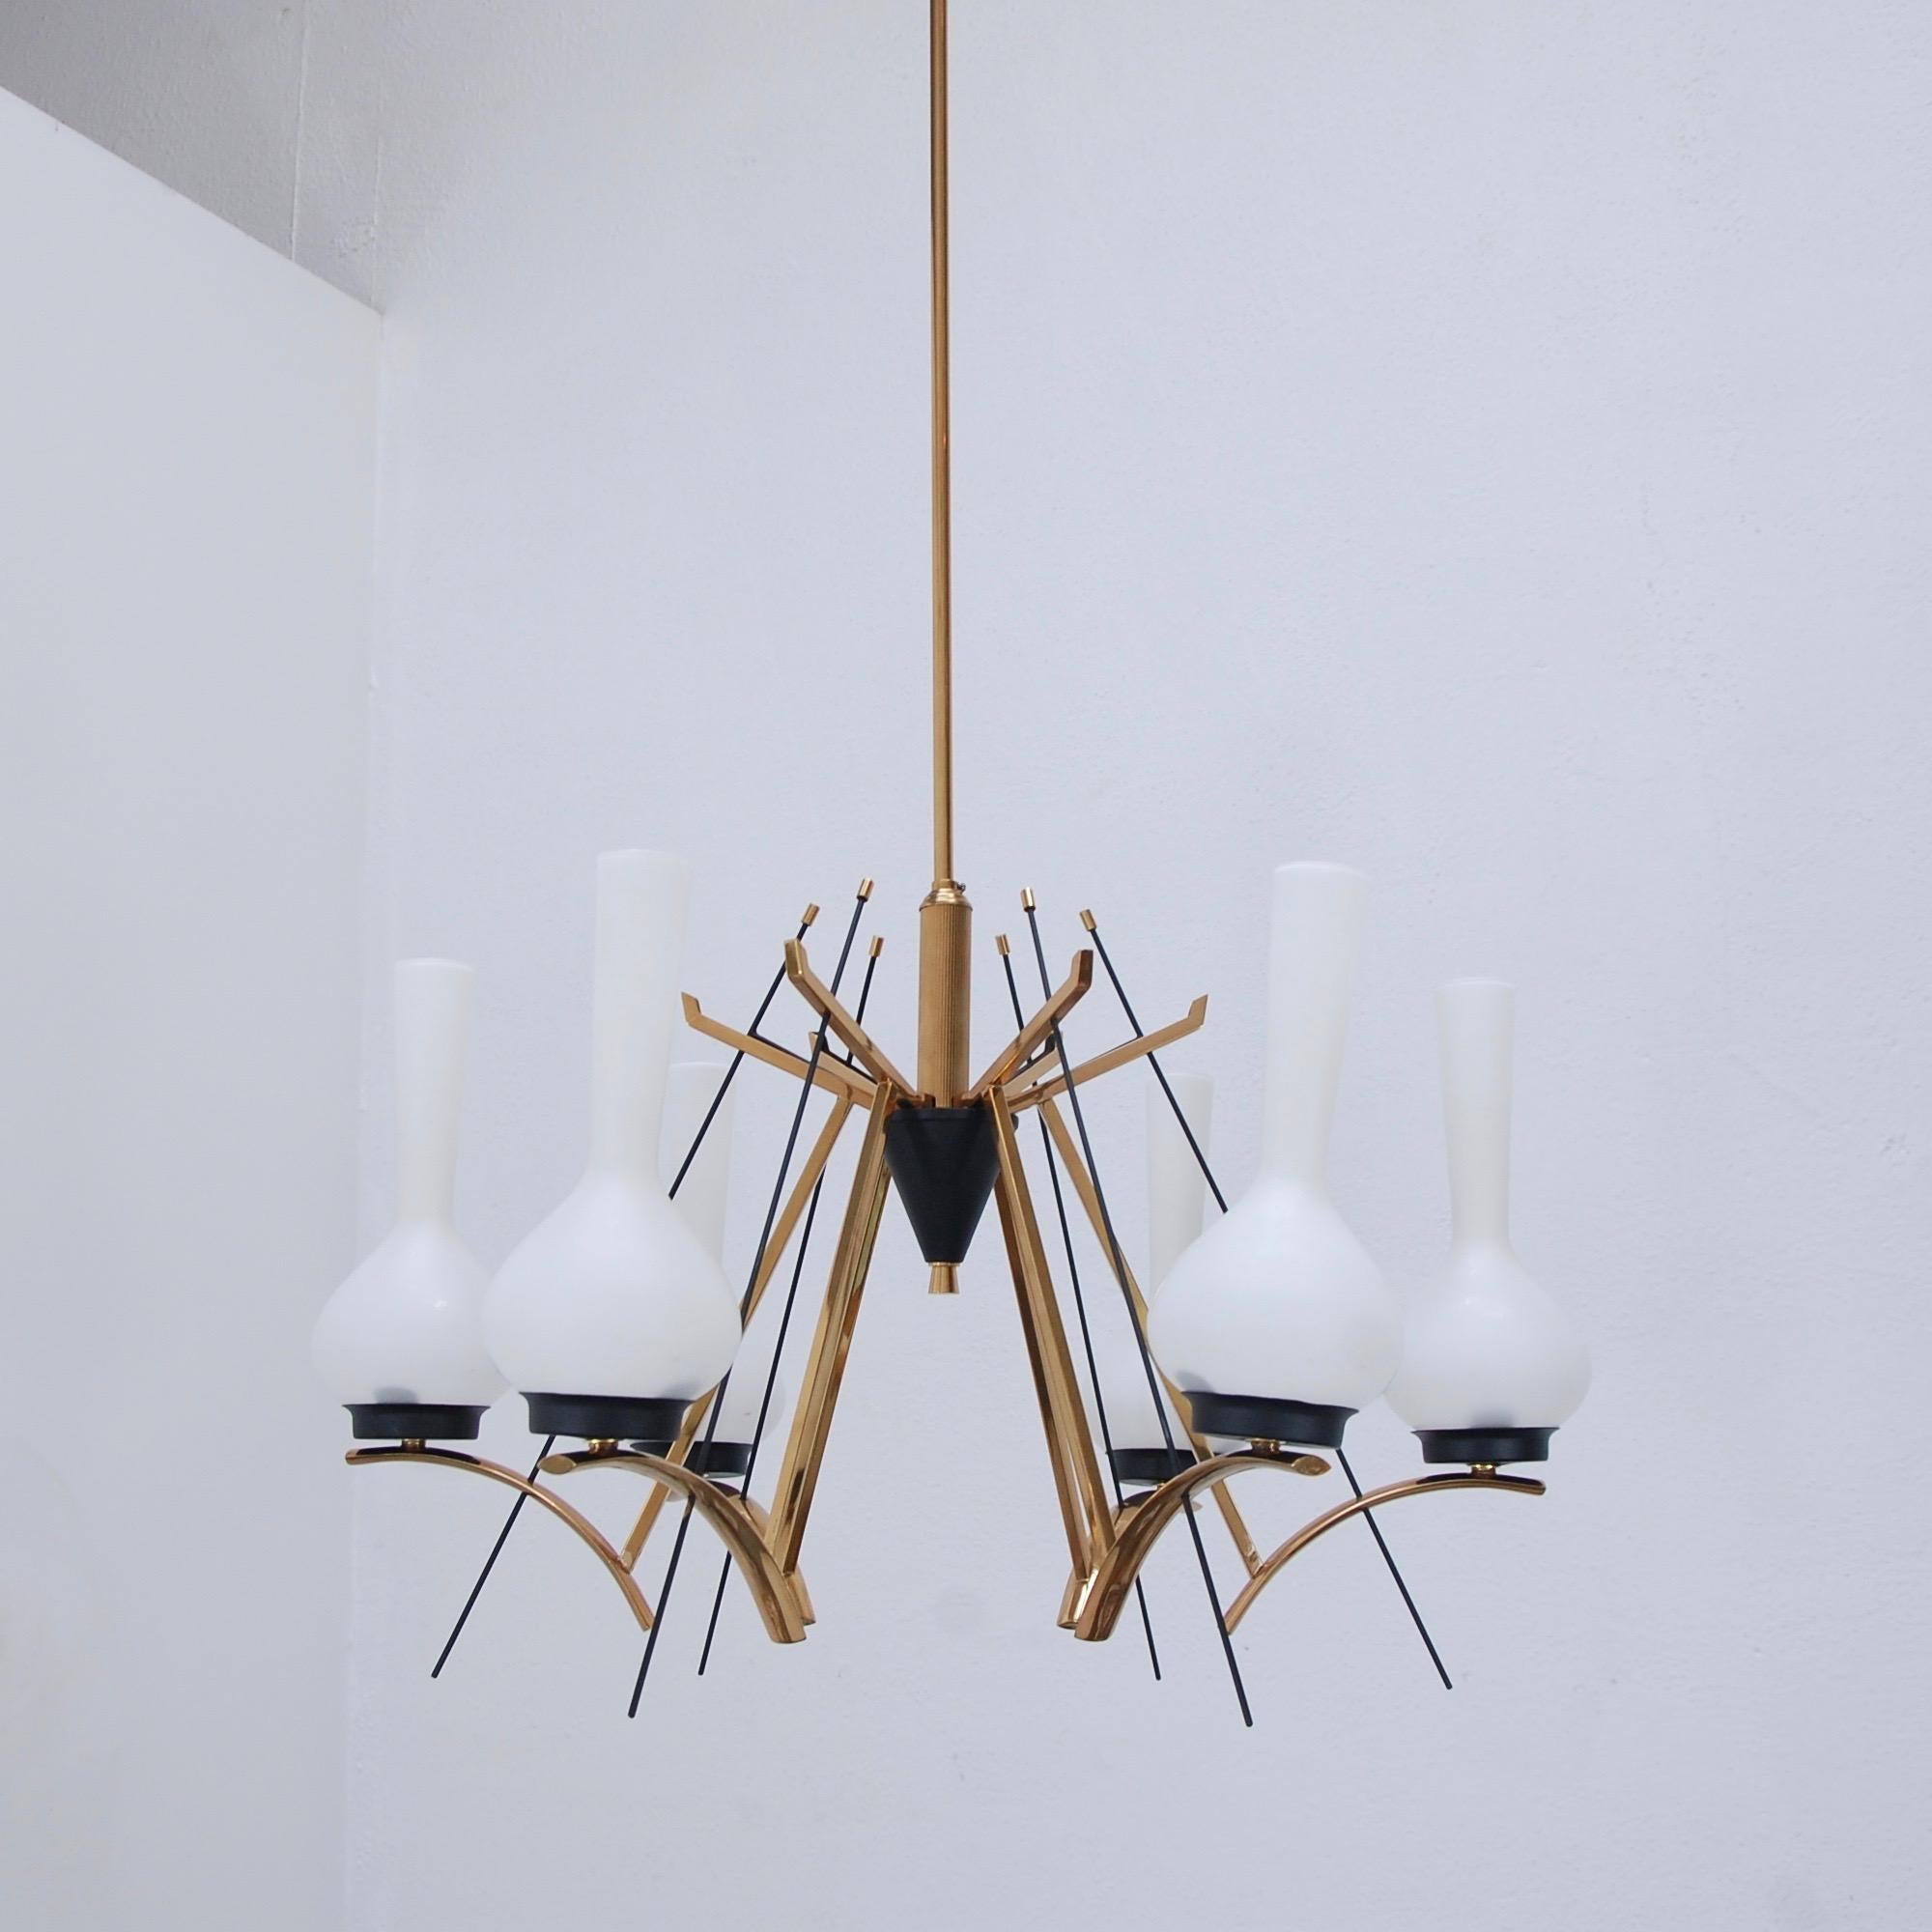 Classic midcentury 6-light chandelier from 1950s, Italy. Naturally added brass patina. Wired for use in the US. Current OAD can be adjusted upon request. (6) Single E12 candelabra based light sockets. Light bulbs included. 
Measurements:
Fixture